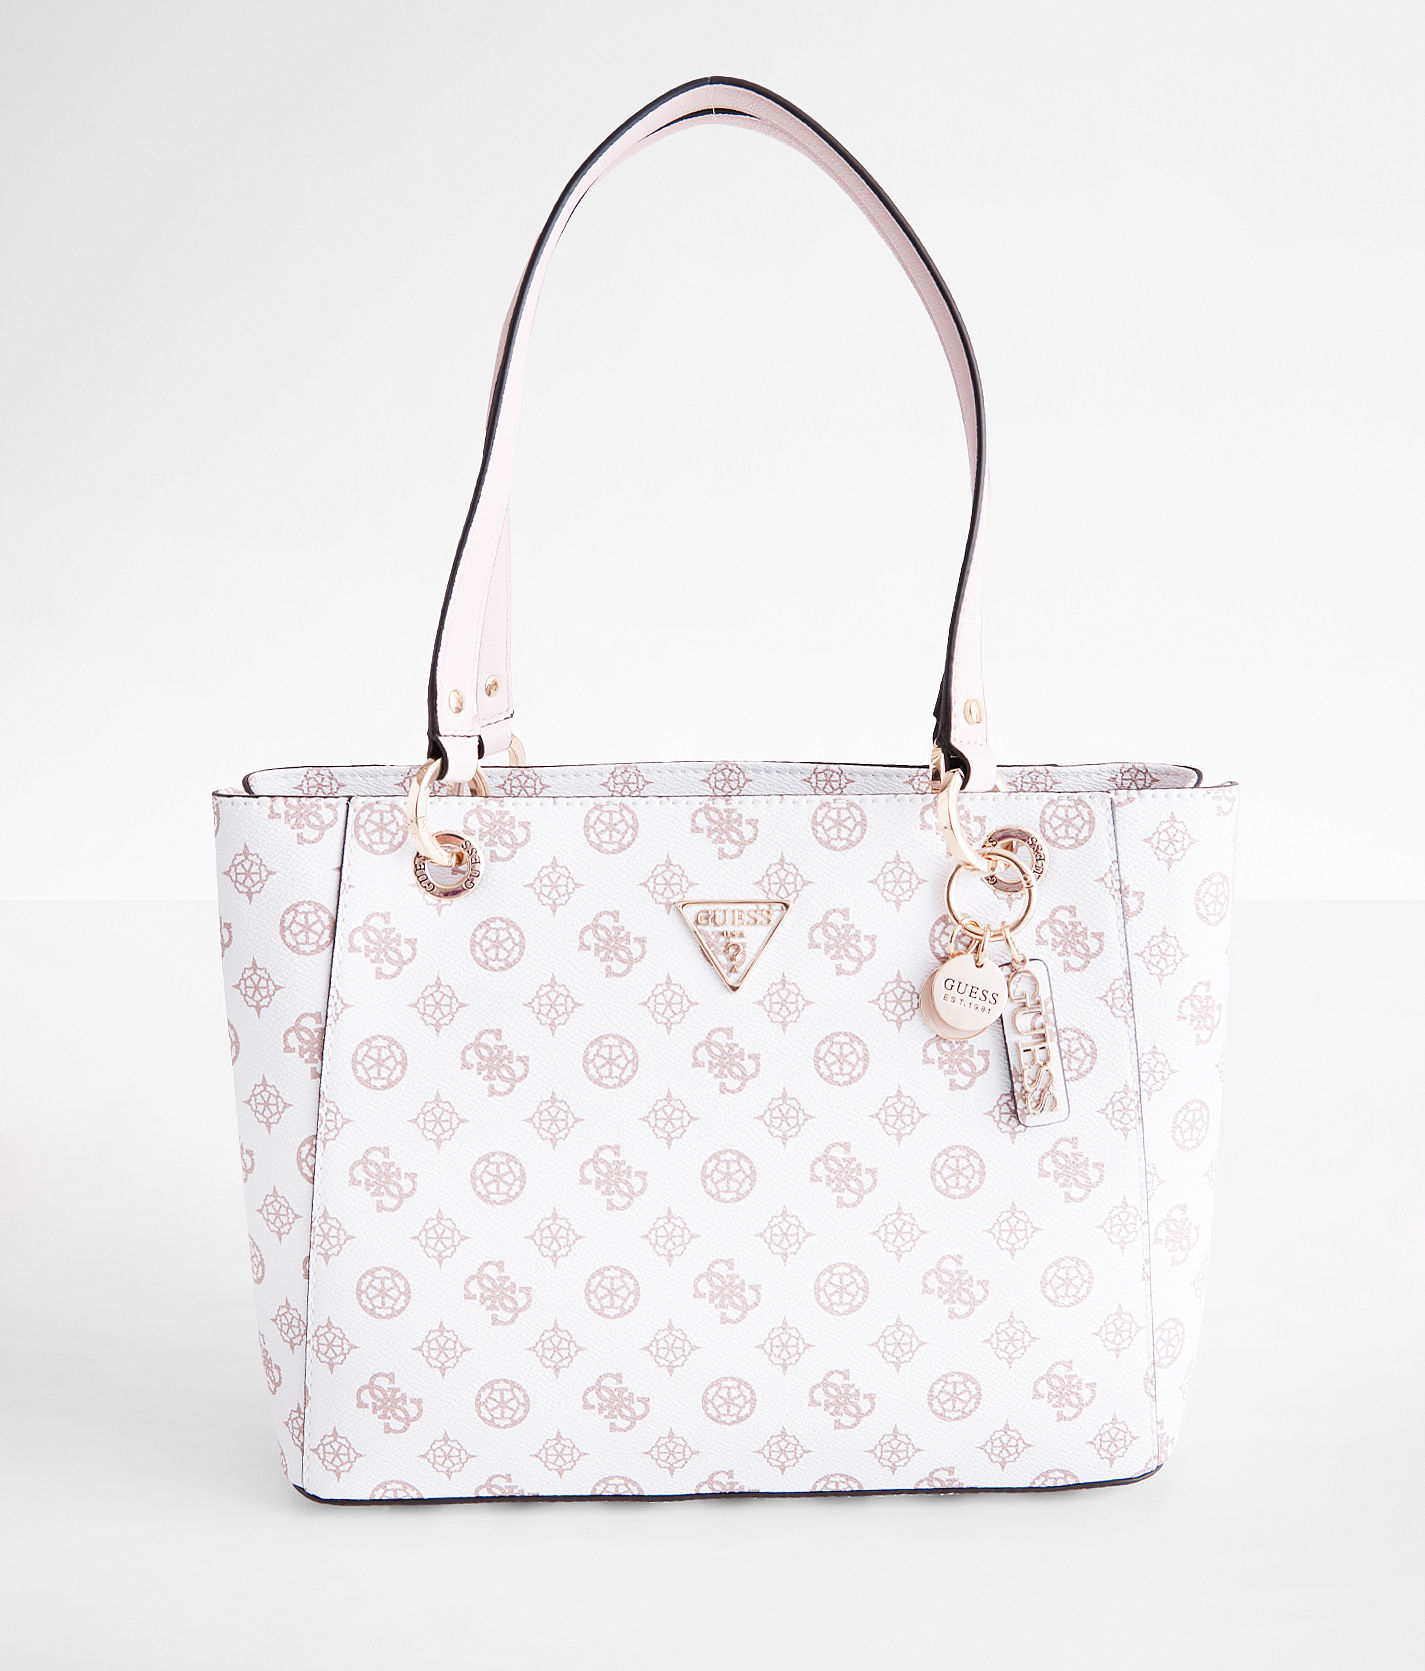 GUESS Tote Bags